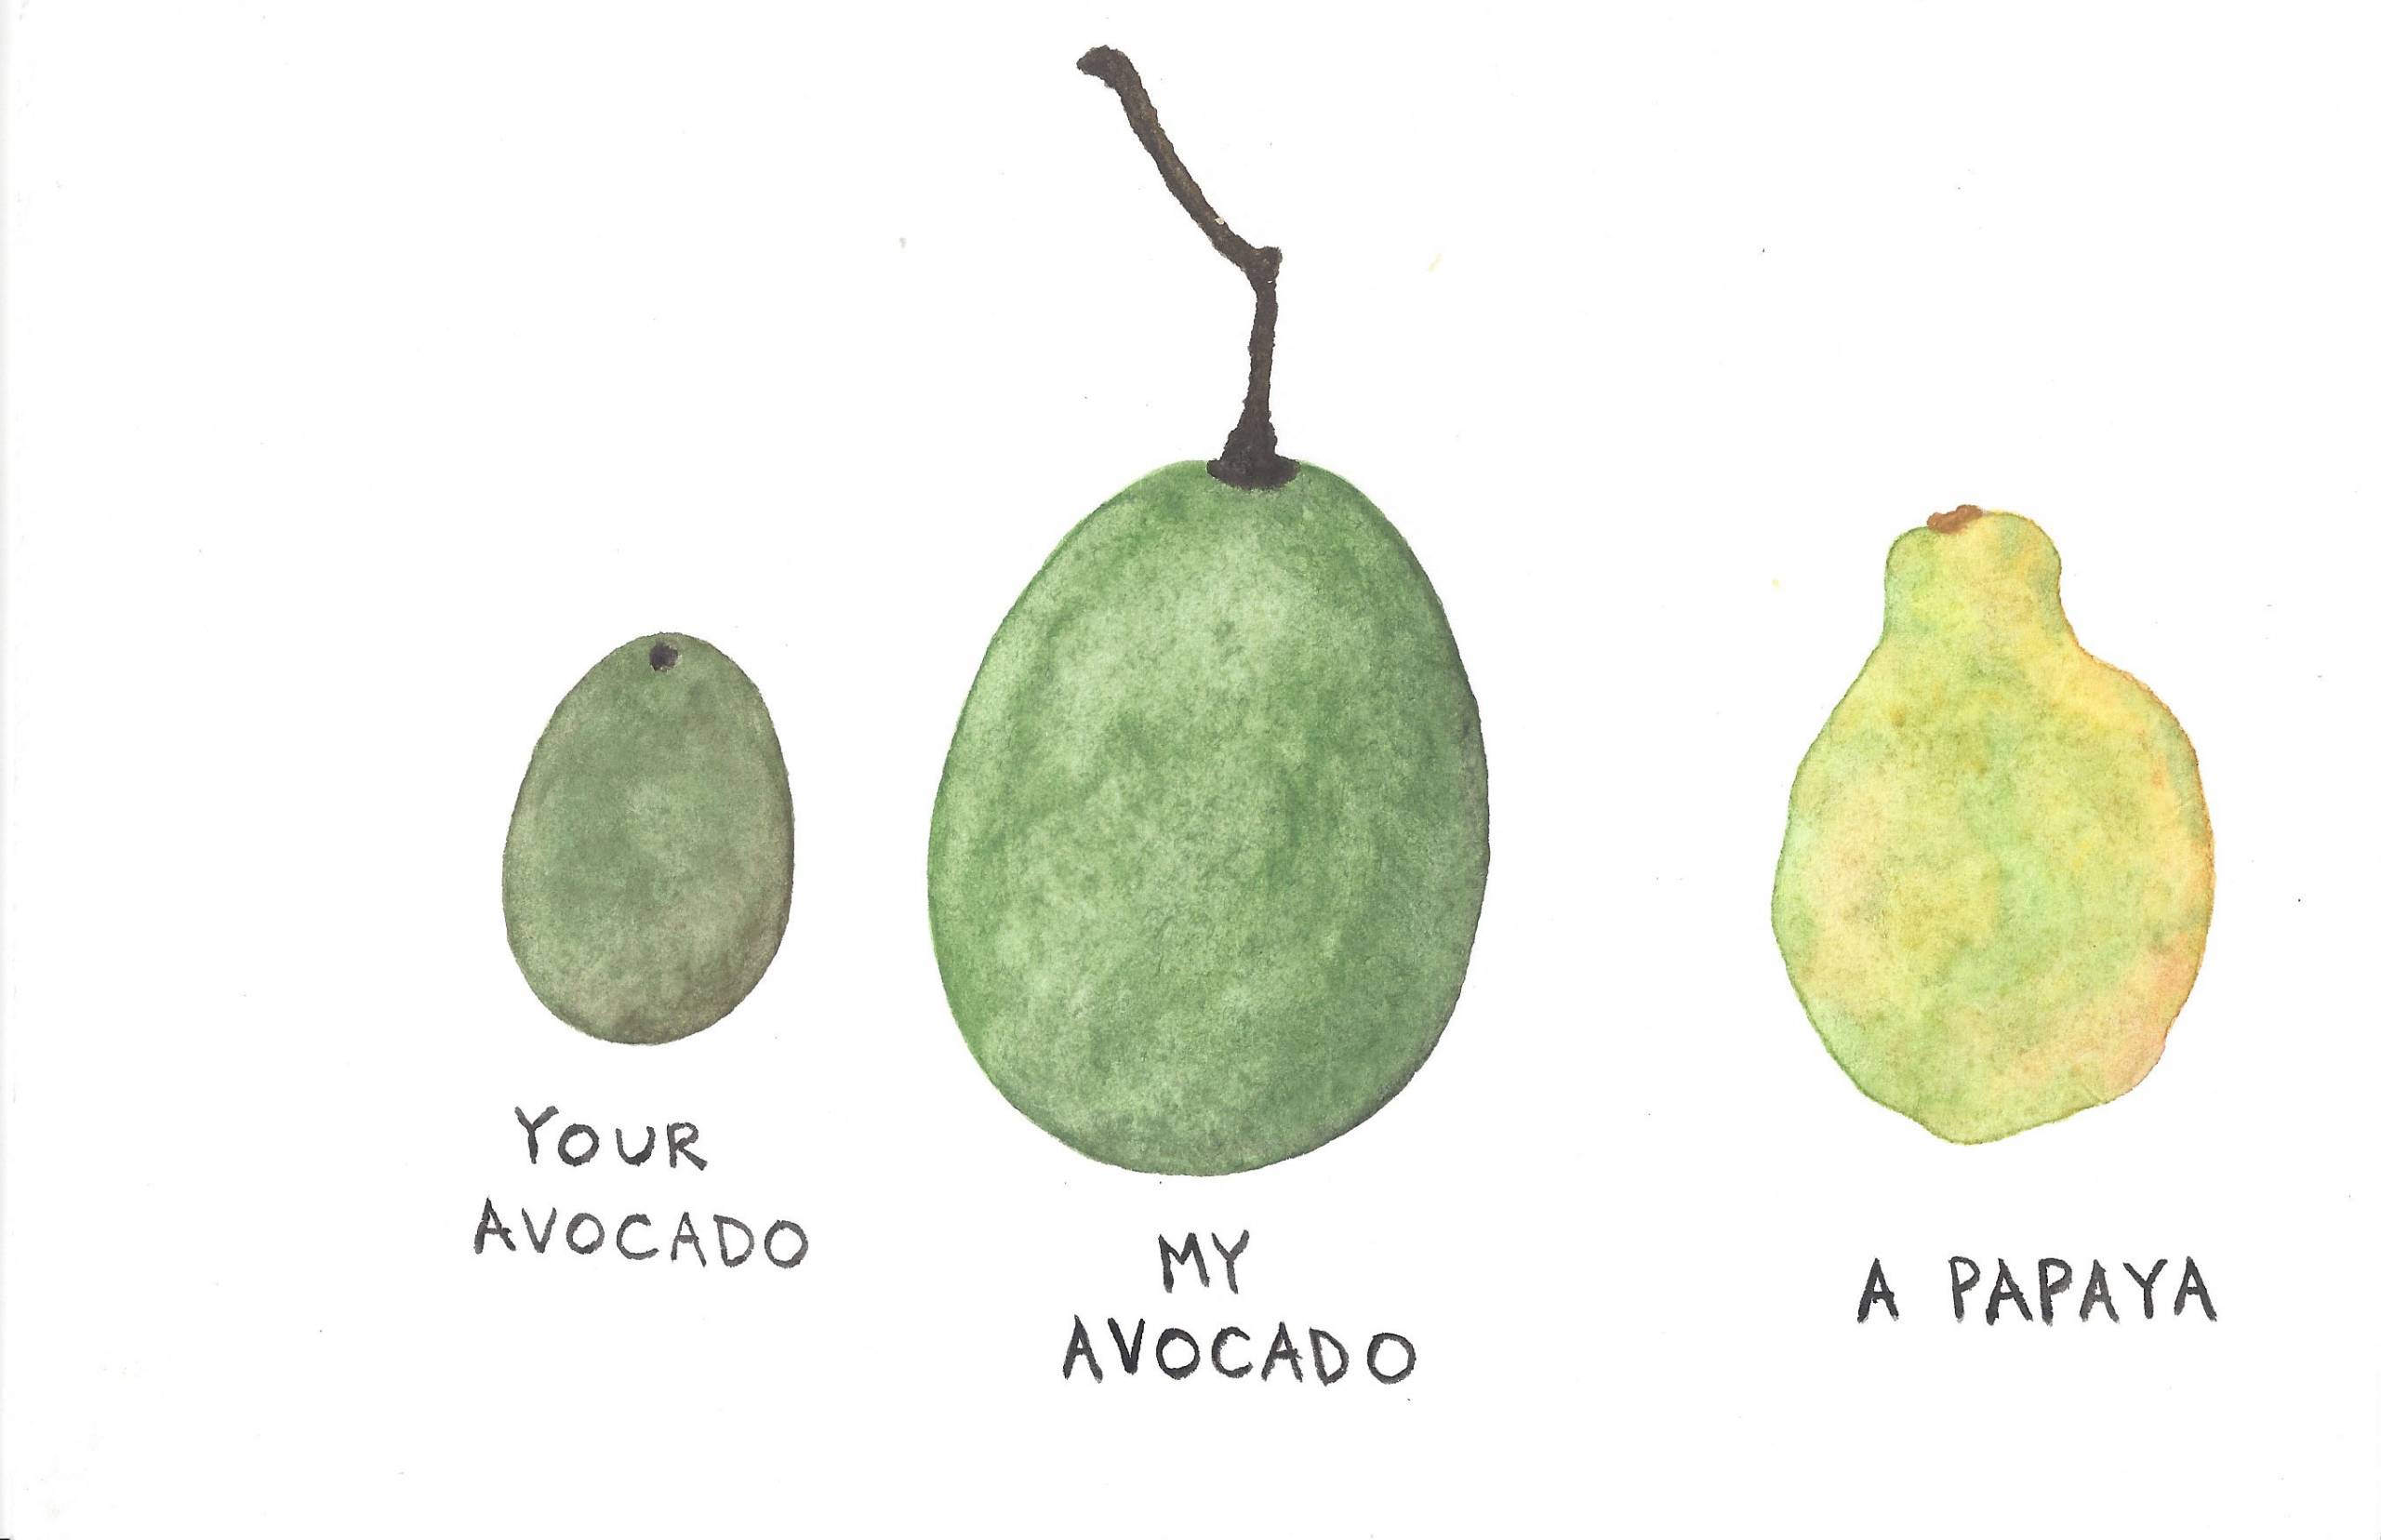 Watercolor painting of three fruits in different sizes and shades of green: 